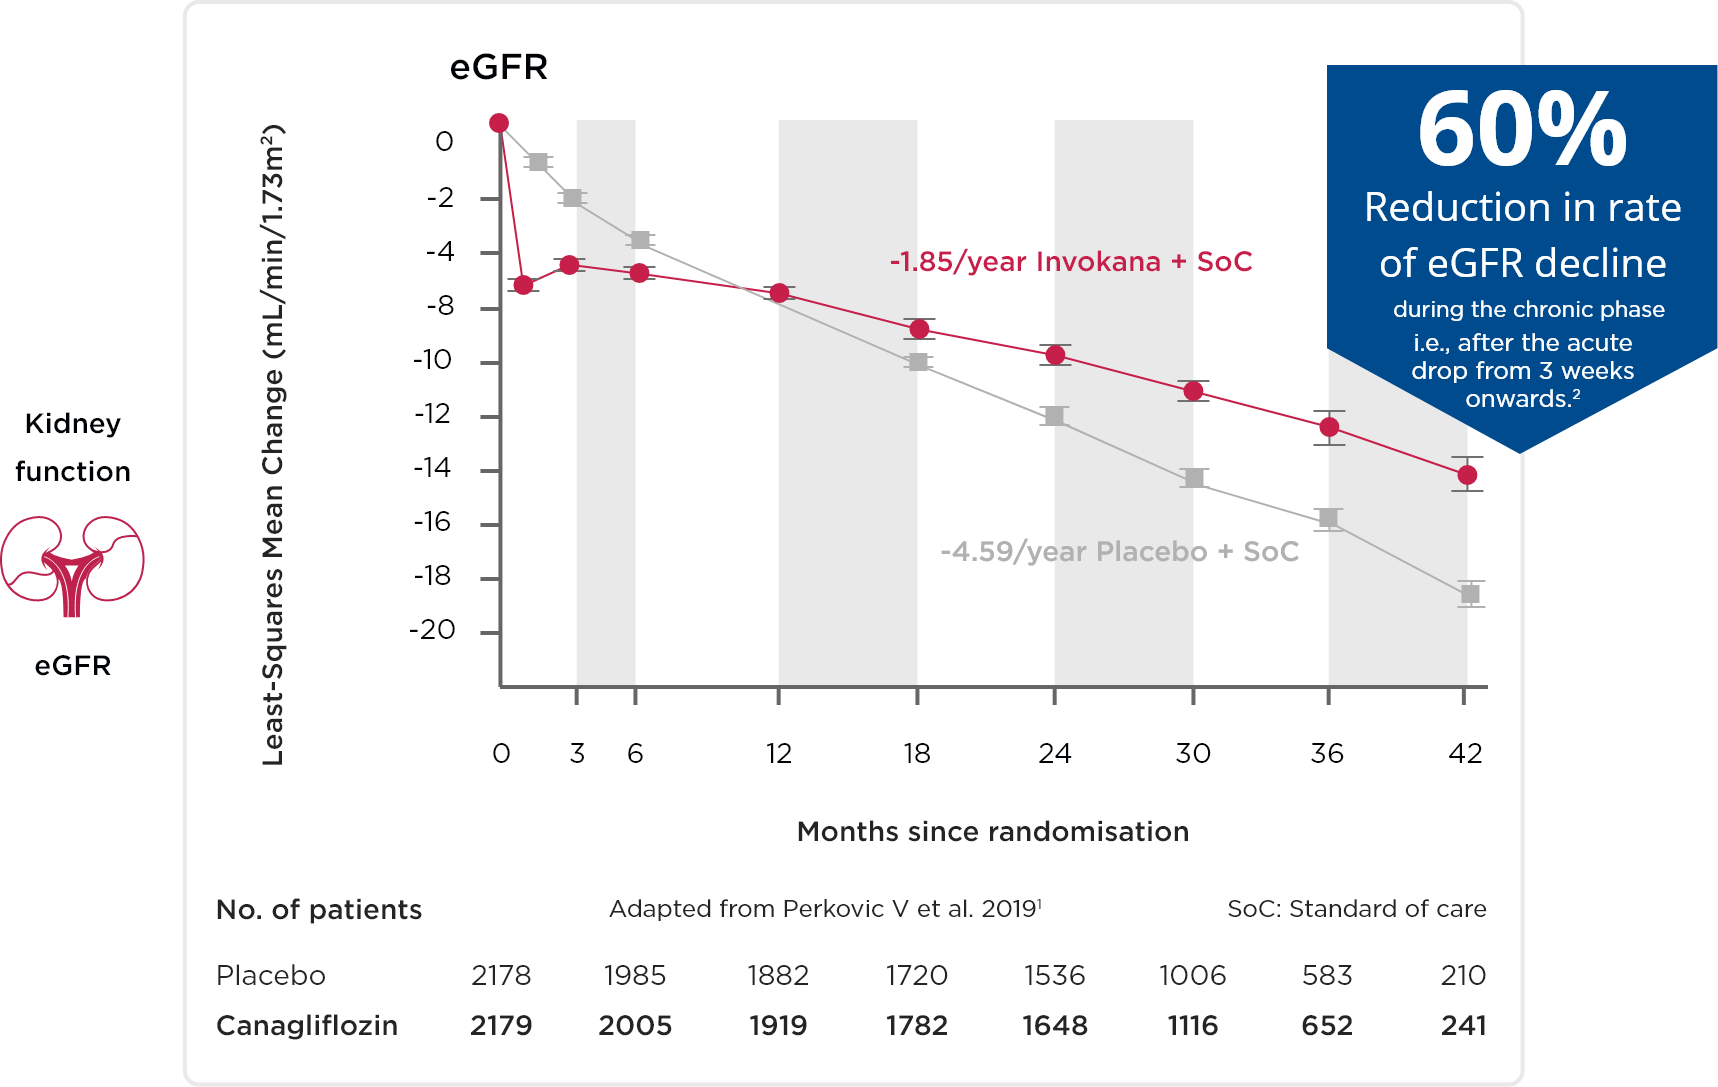 Reduction in rate of eGFR decline